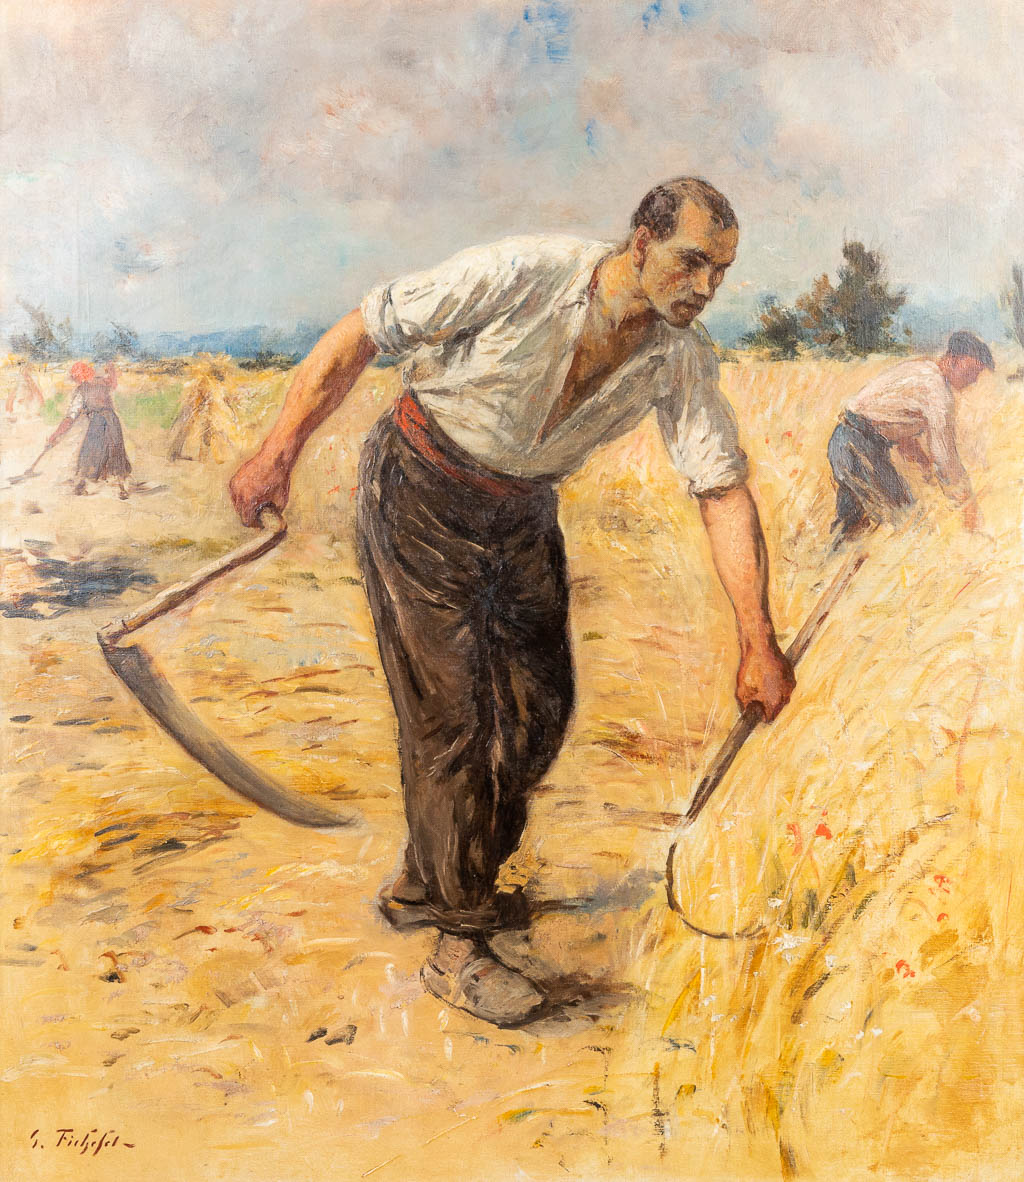 Georges FICHEFET (1864-1954) 'The Harvest' a painting, oil on canvas. (W:99 x H:114 cm)